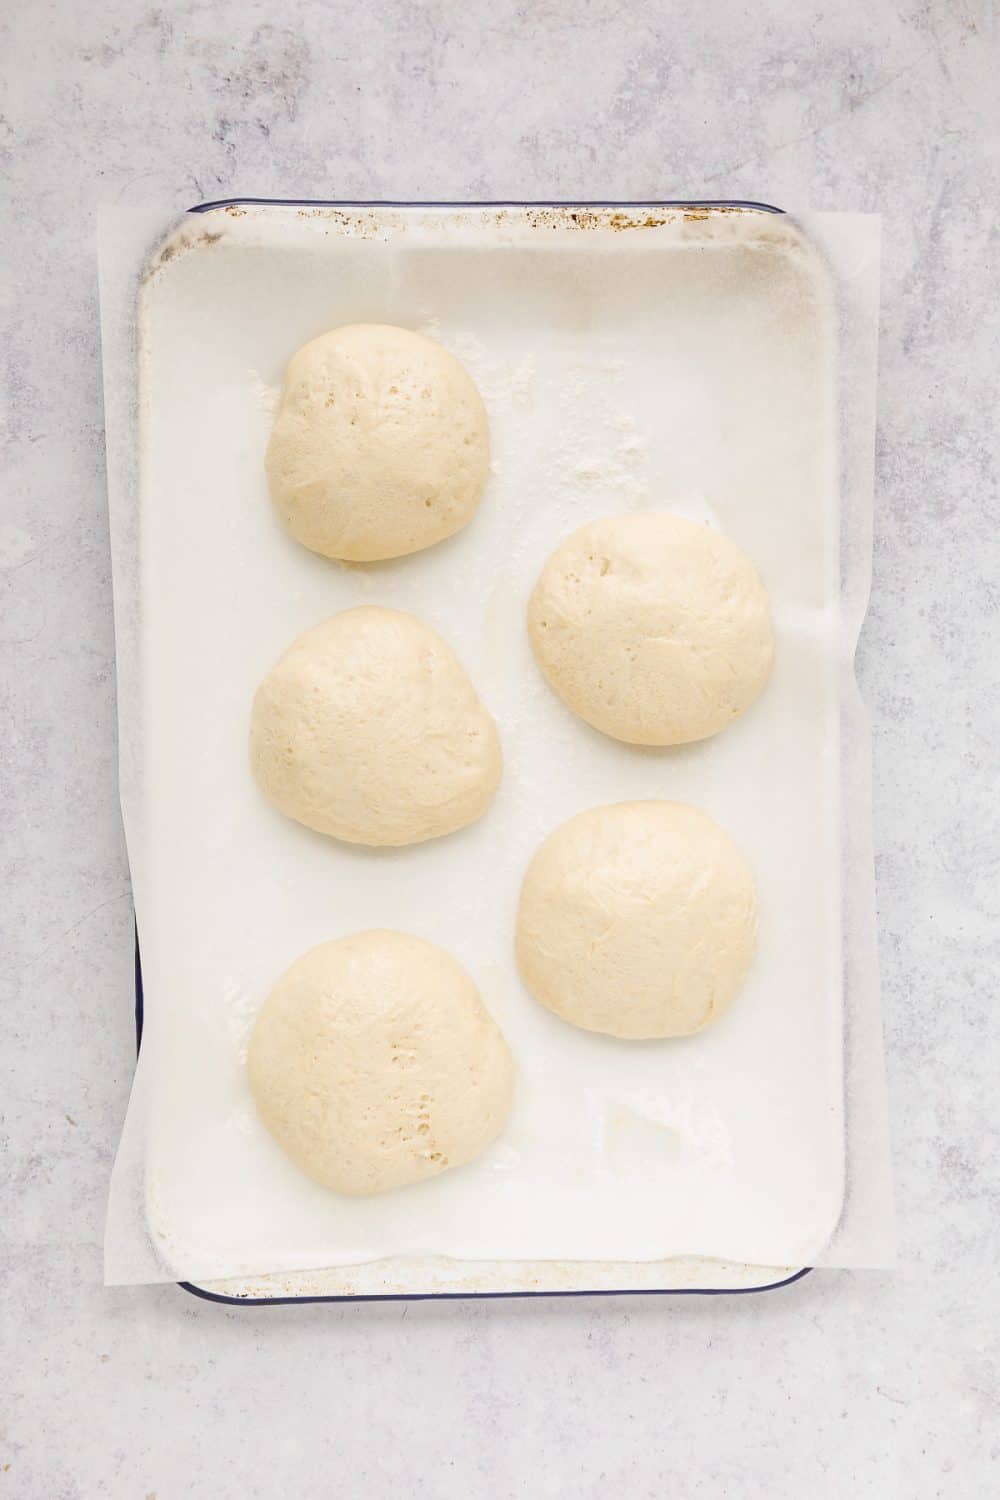 5 risen balls of doughnut dough on a white baking tray lined with baking paper. 